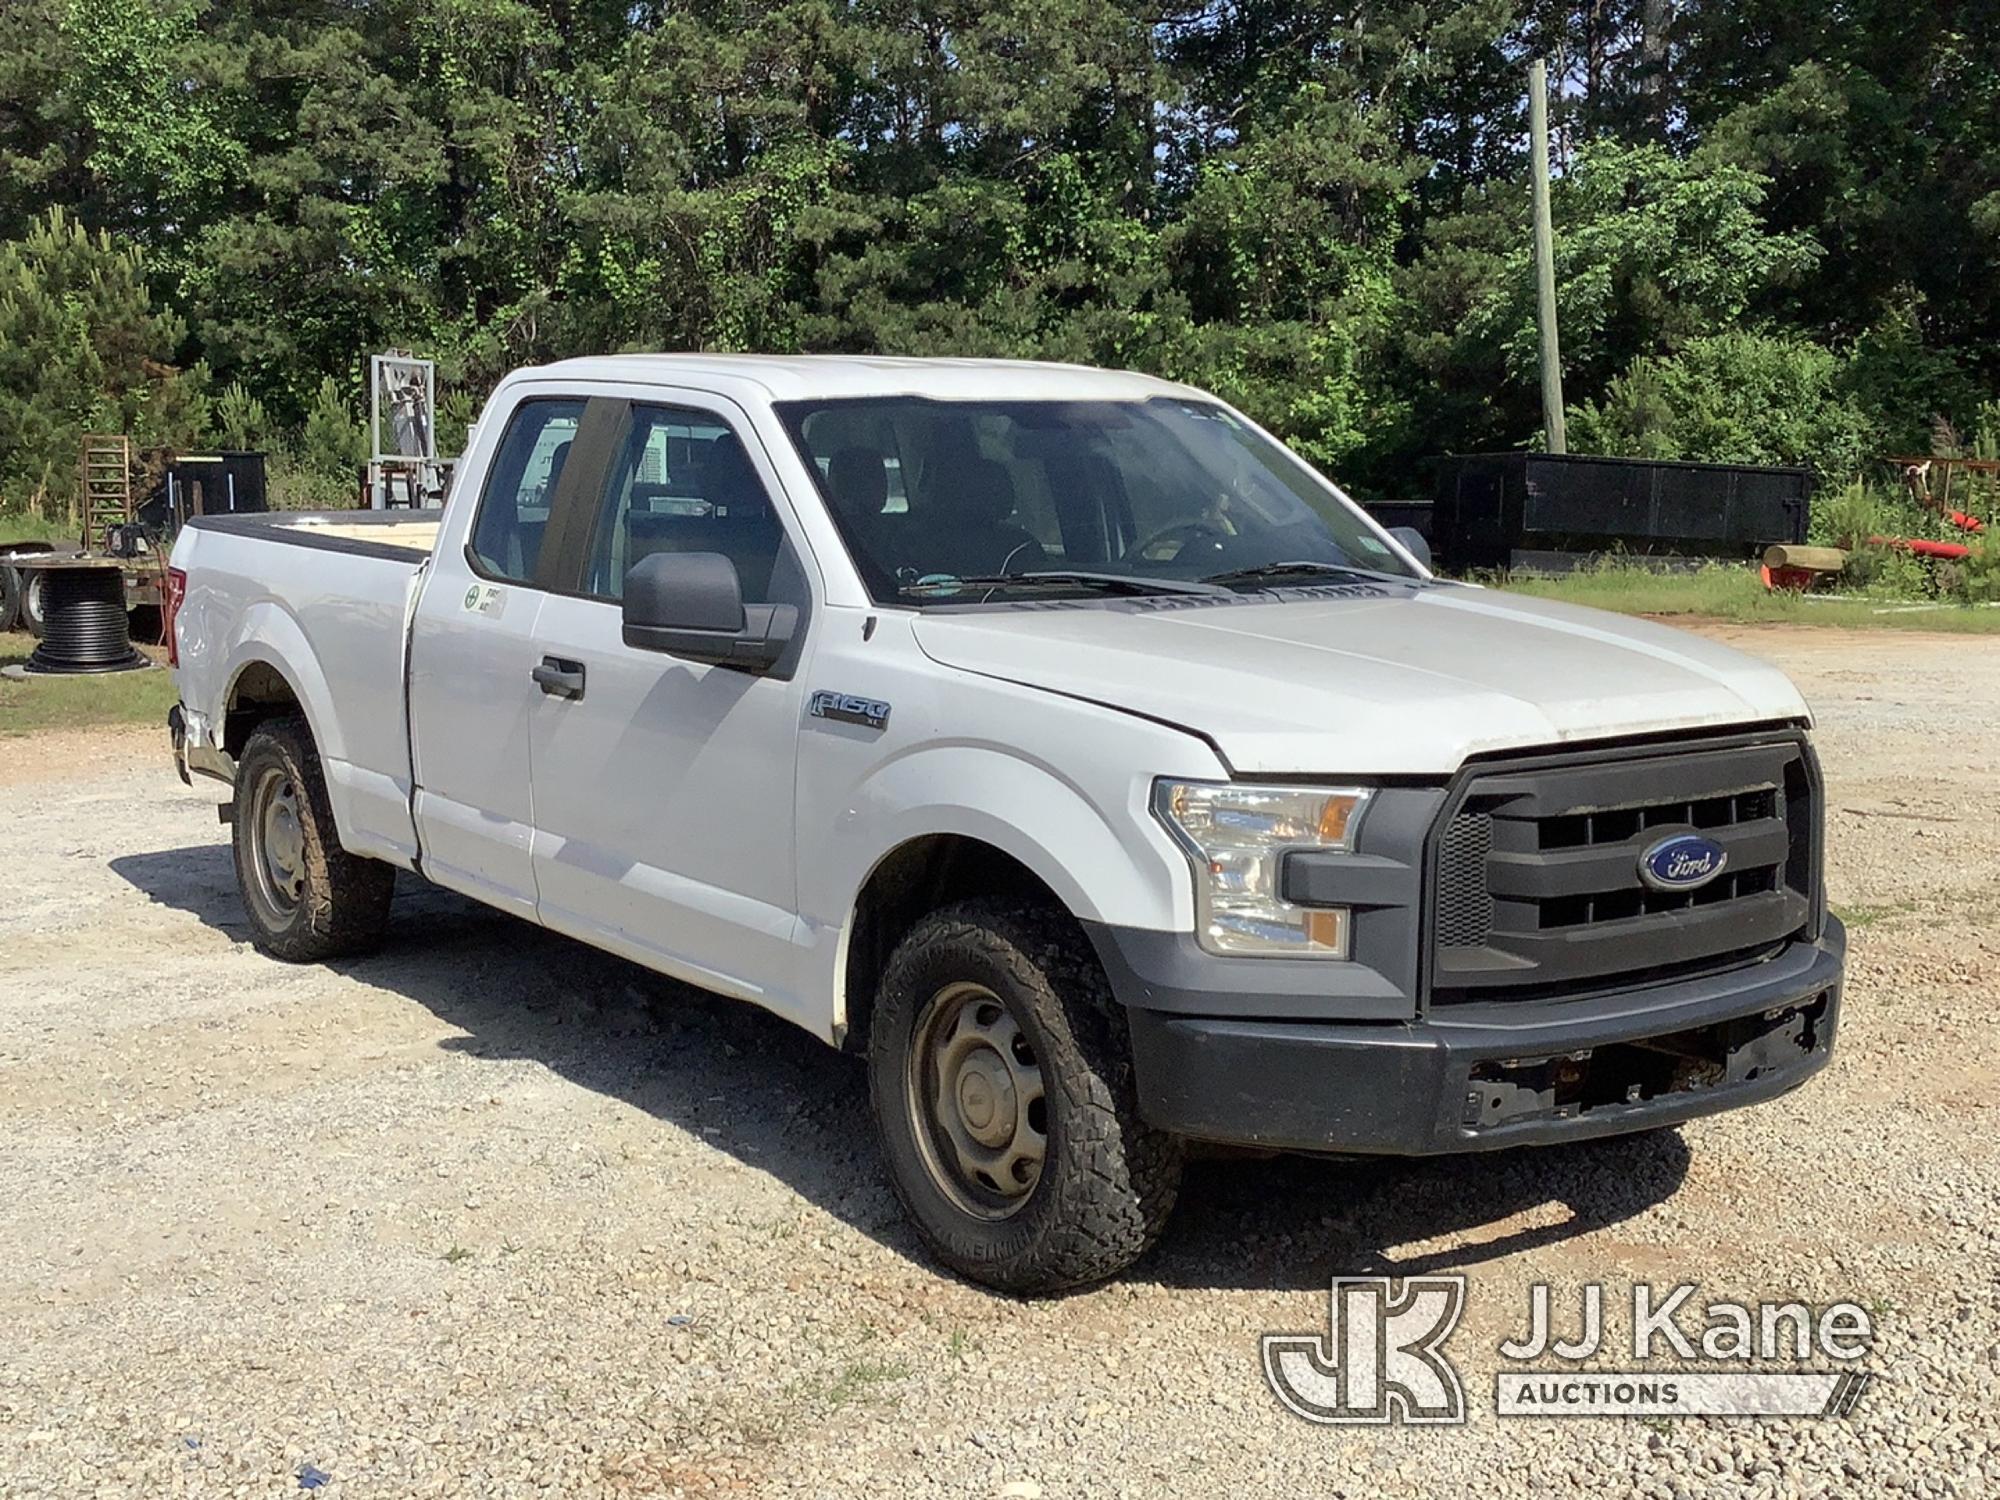 (Douglasville, GA) 2015 Ford F150 Extended-Cab Pickup Truck Runs Intermittently, Jump To Start, Chec